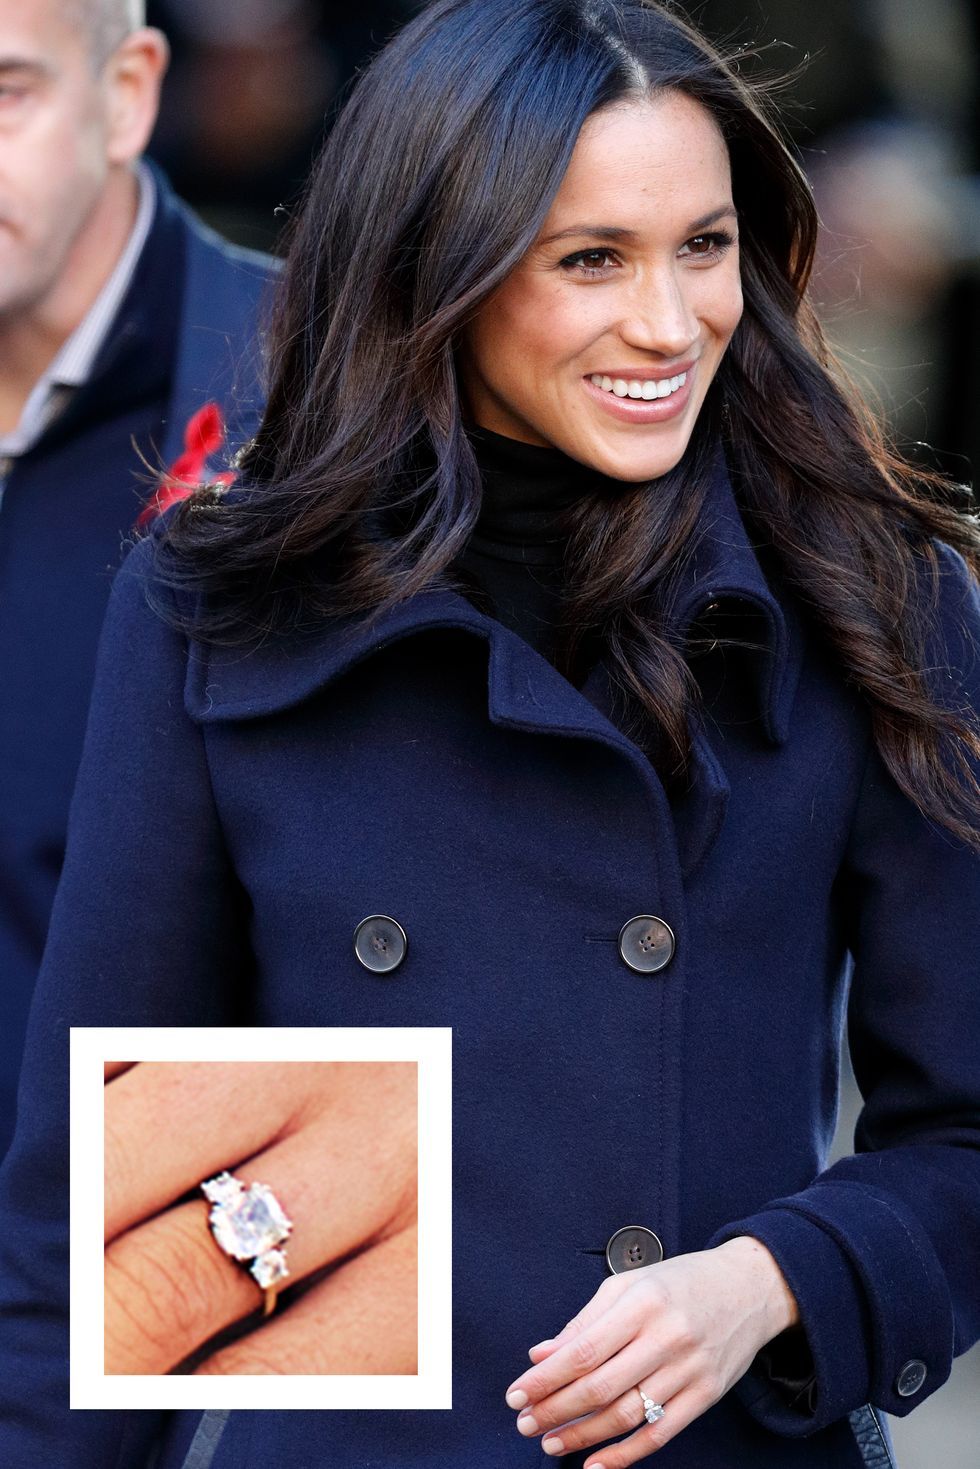 celebrity engagement rings, expensive engagement rings, best celebrity engagement rings, most expensive celebrity engagement rings, celebrity engagement rings, biggest celebrity engagement rings, largest celebrity engagement rings,婚約指輪,エメラルド,サファイヤ,イエローダイヤモンド,new